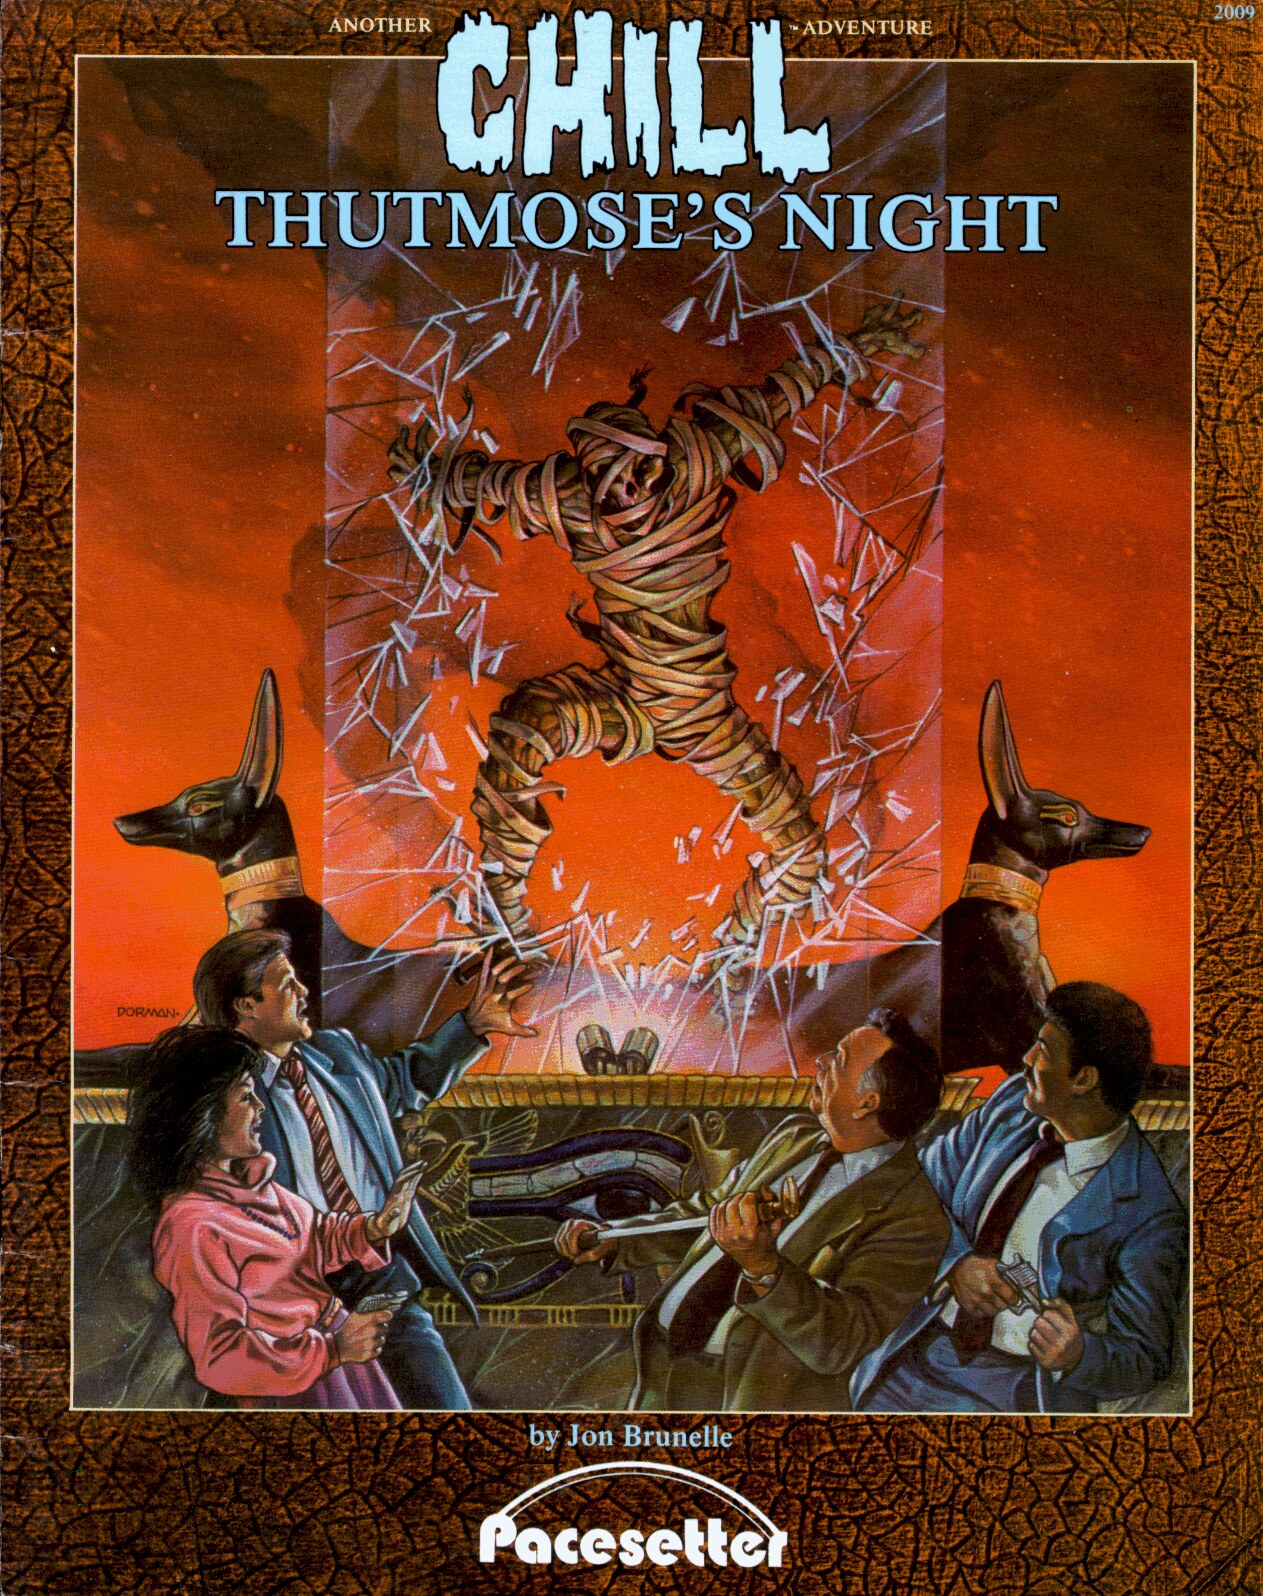 2009 Thutmose's Night (missing pages 1,2 and maybe 31,32)